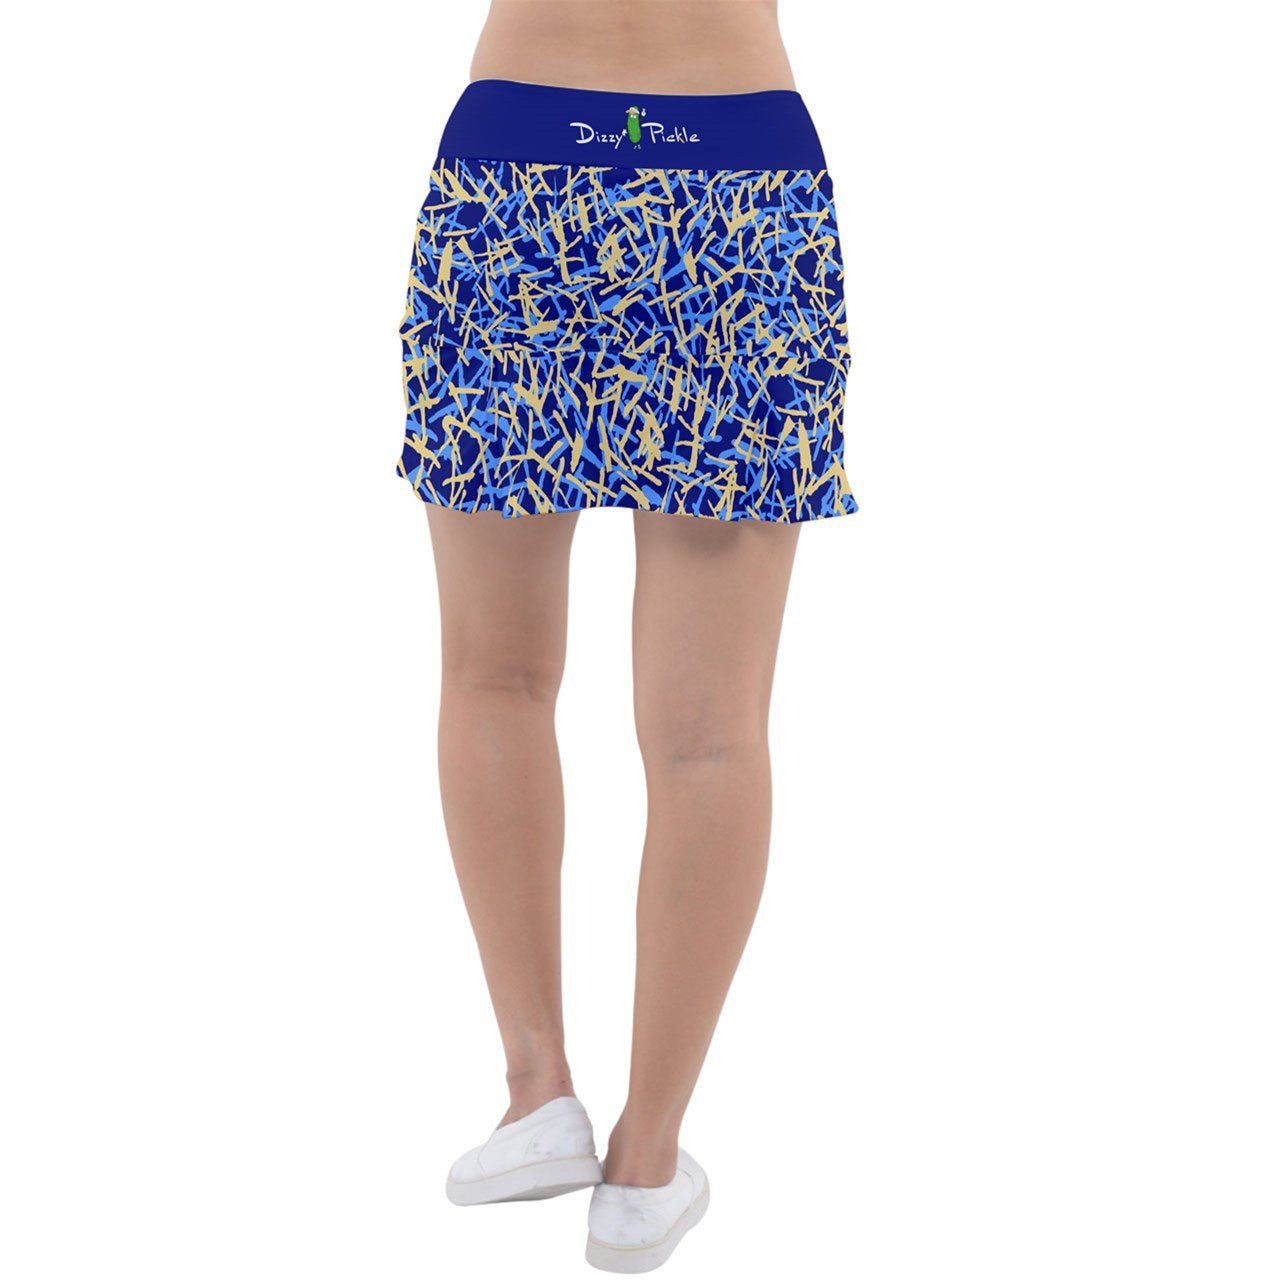 Dizzy Pickle Lesia Confetti BYB Women's Pickleball Classic Skort with Inner Shorts and Pockets